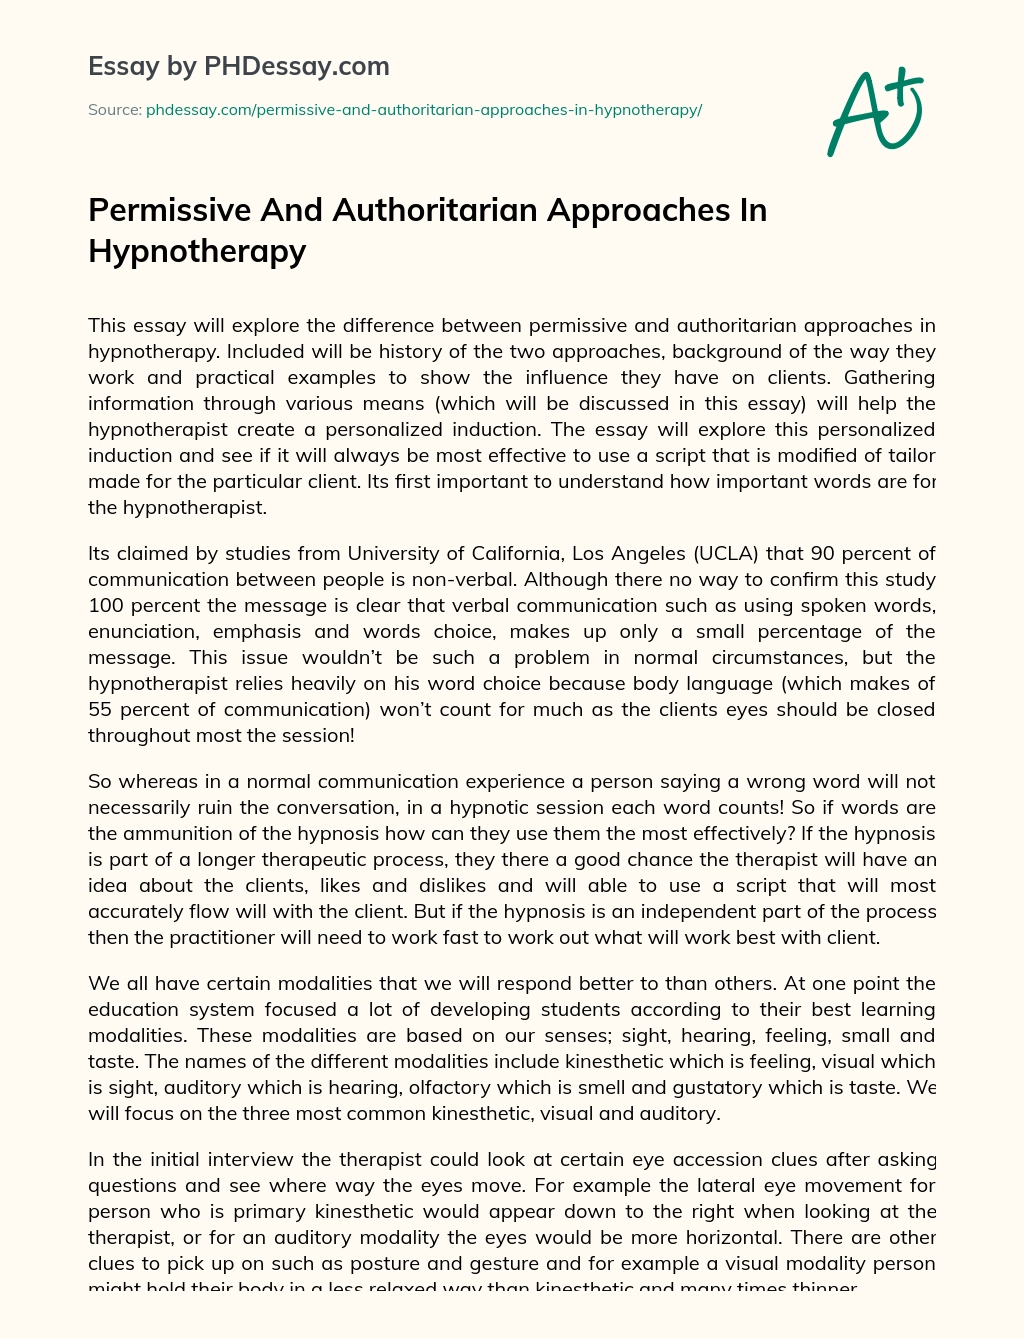 Permissive And Authoritarian Approaches In Hypnotherapy essay